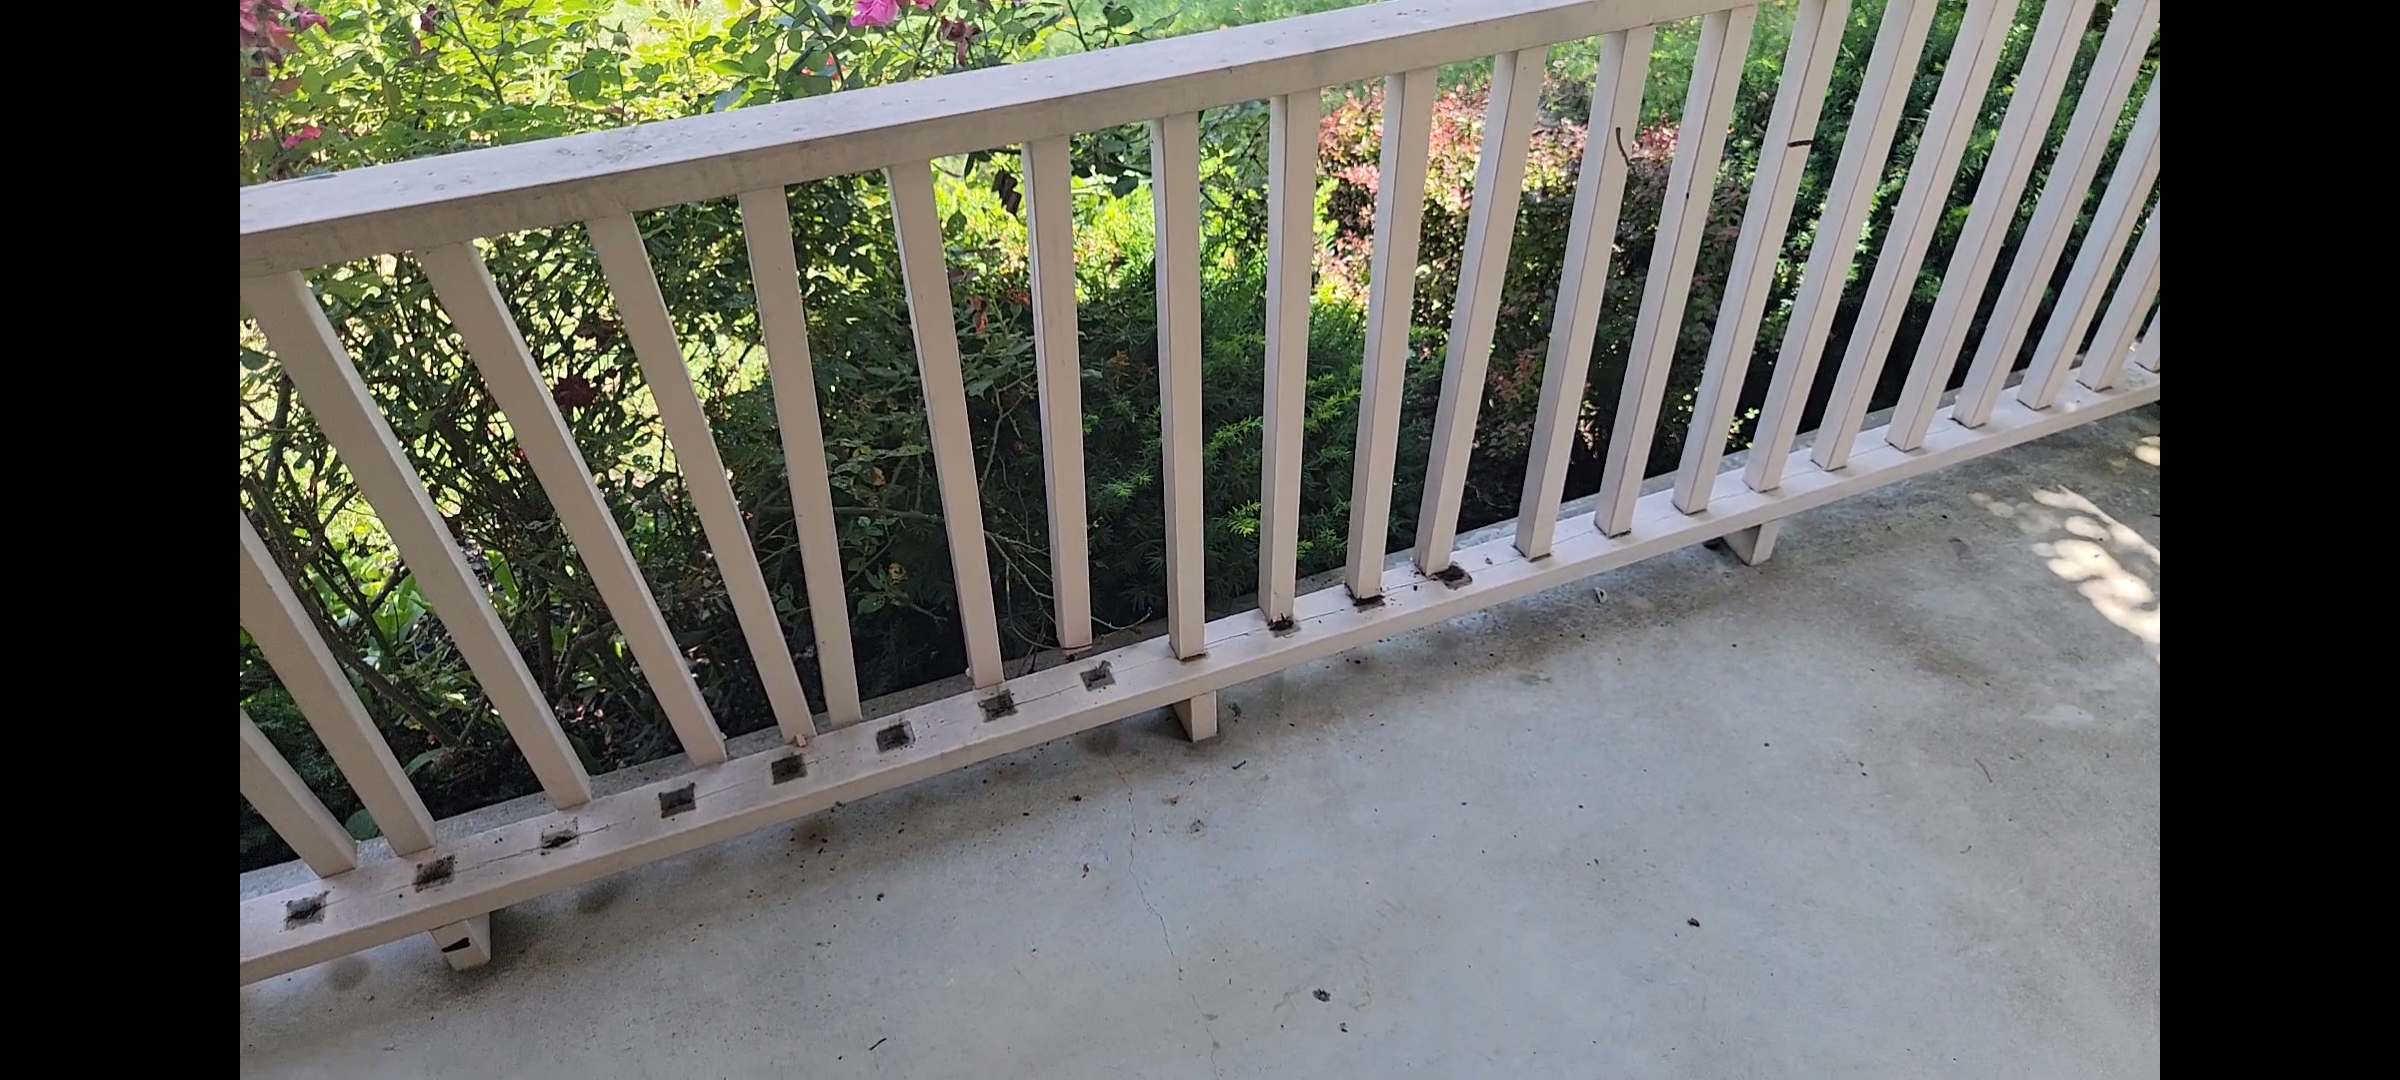 image of wooden porch rail protected by thin residential paint , its rotten and its spindles are falling apart and coming disconnected. It needs better protection